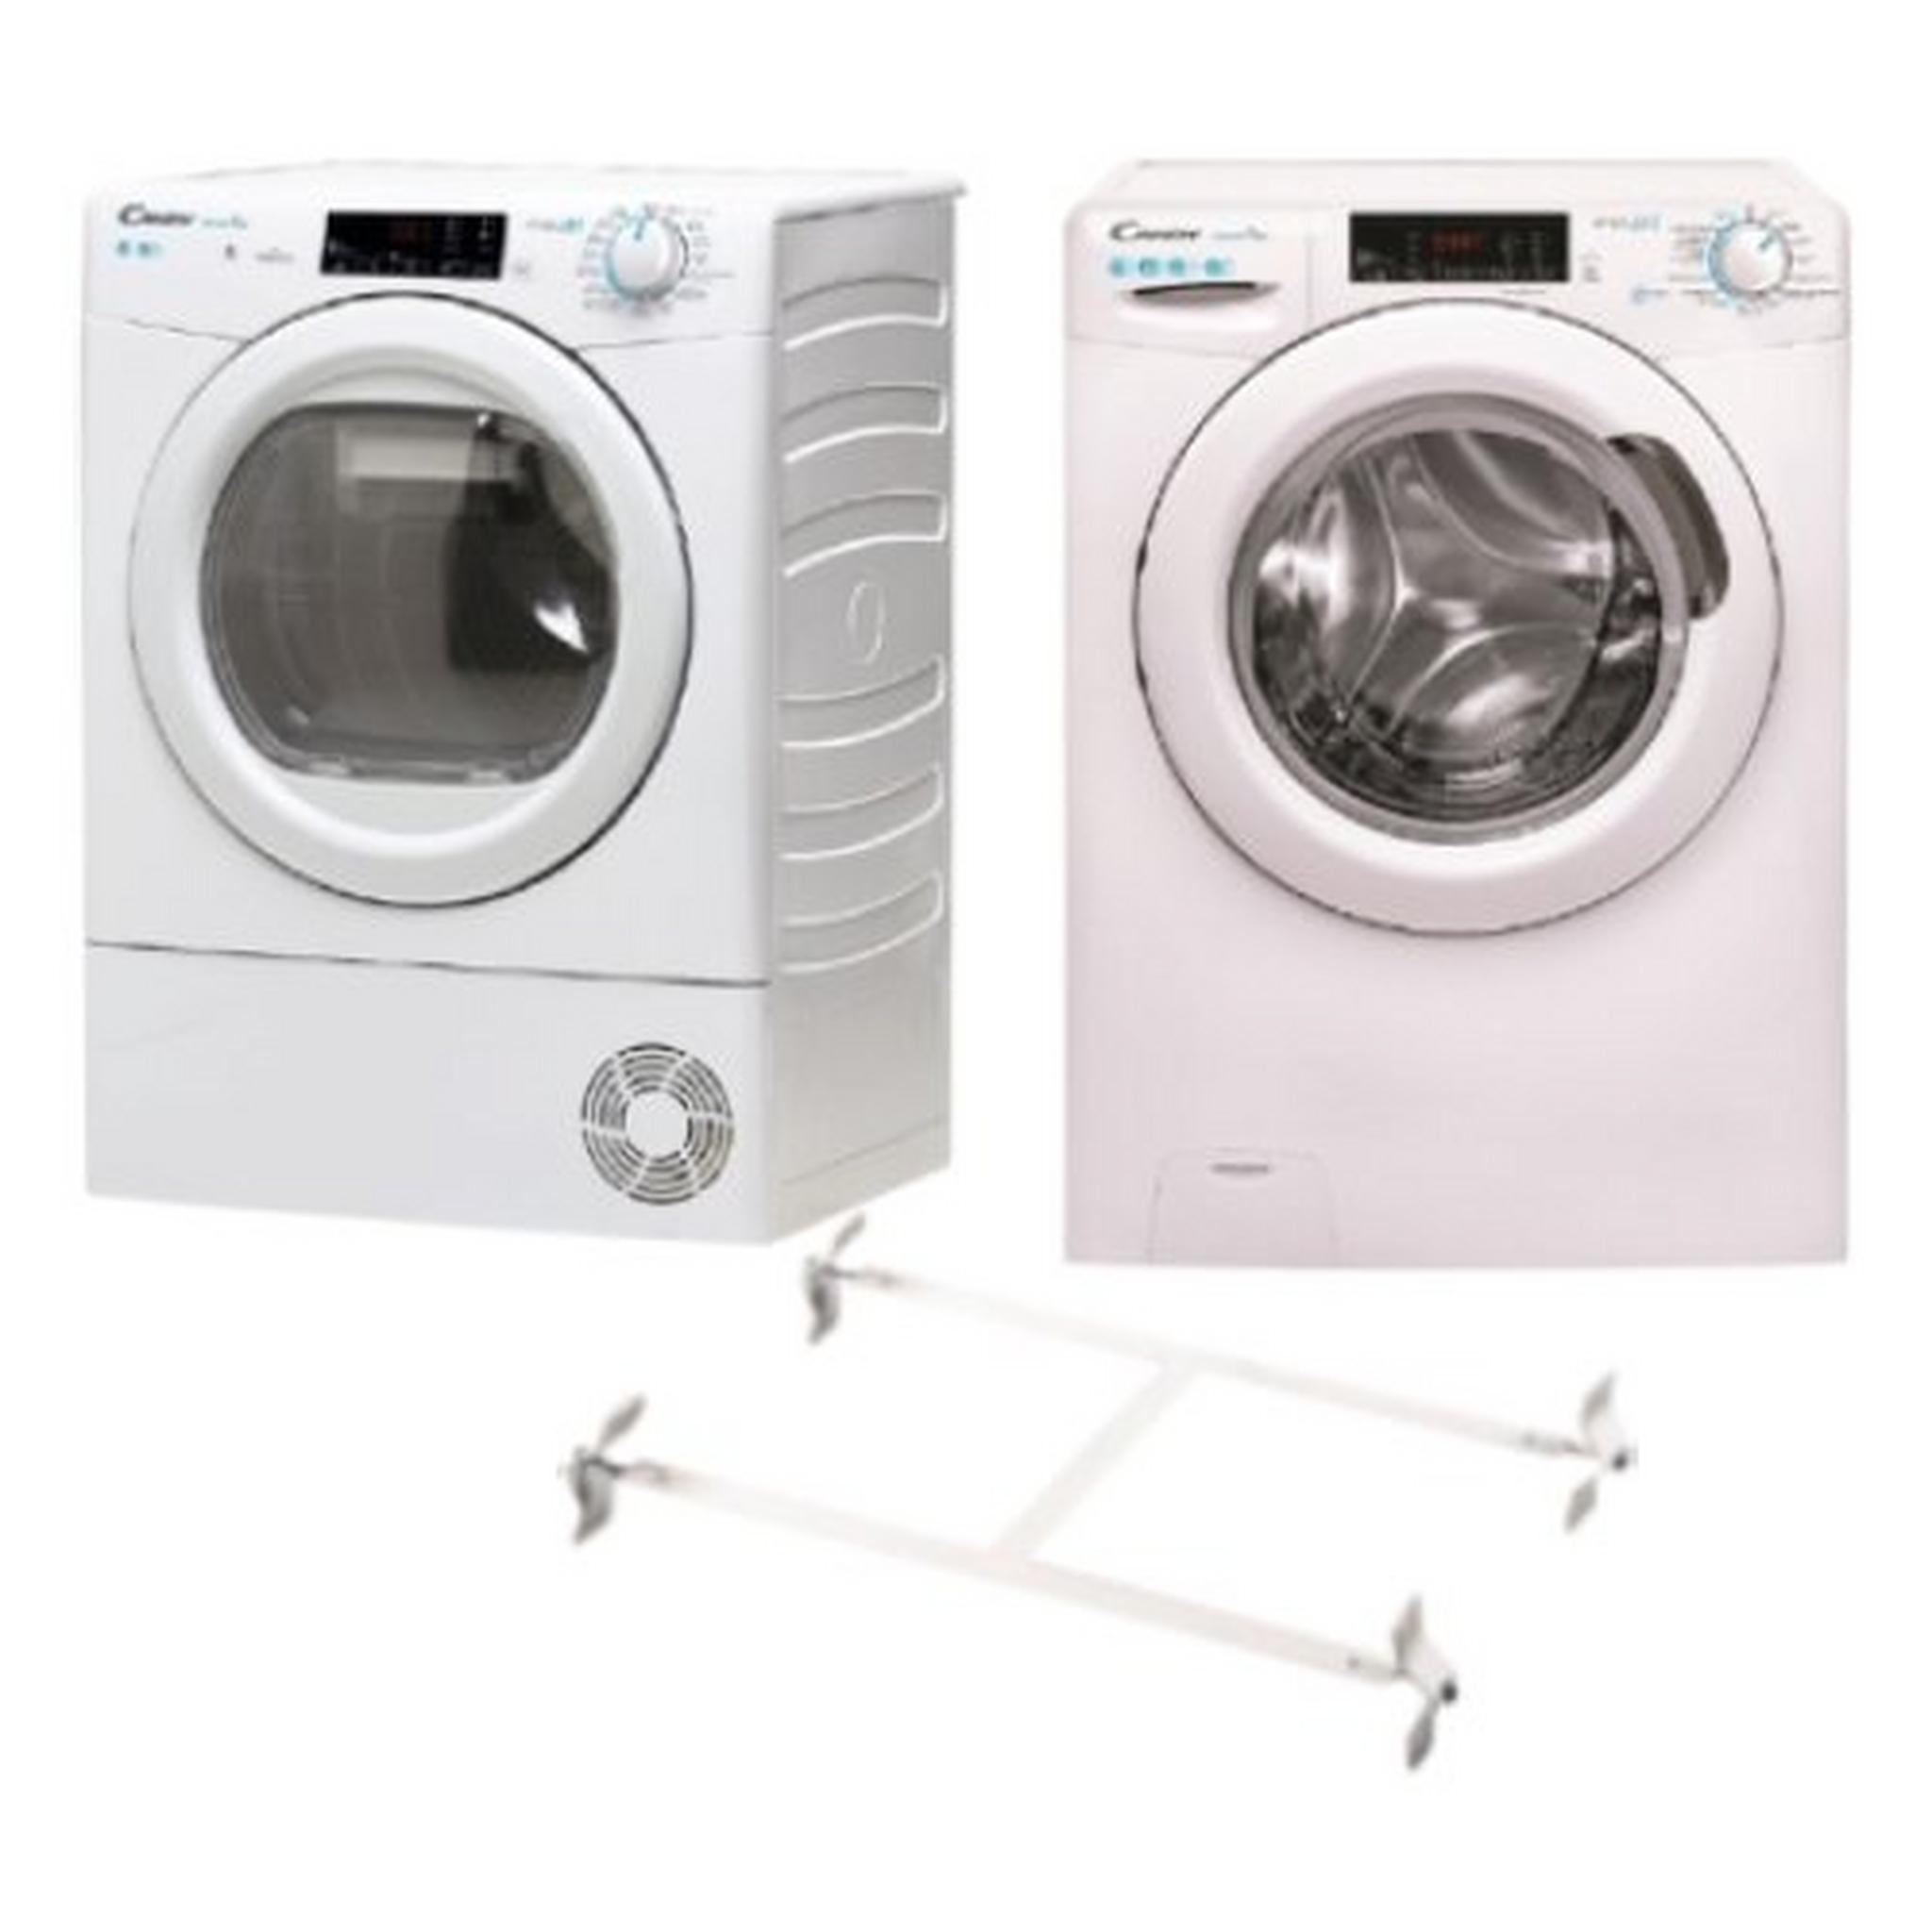 Candy 10KG Front Load Wifi Washing Machine (CSO 14105T3) - White + Candy 10Kg Dryer Condenser - (CSO C10TE-19) + Wansa Washer and Dryer Stacking Unit - Stainless Steel